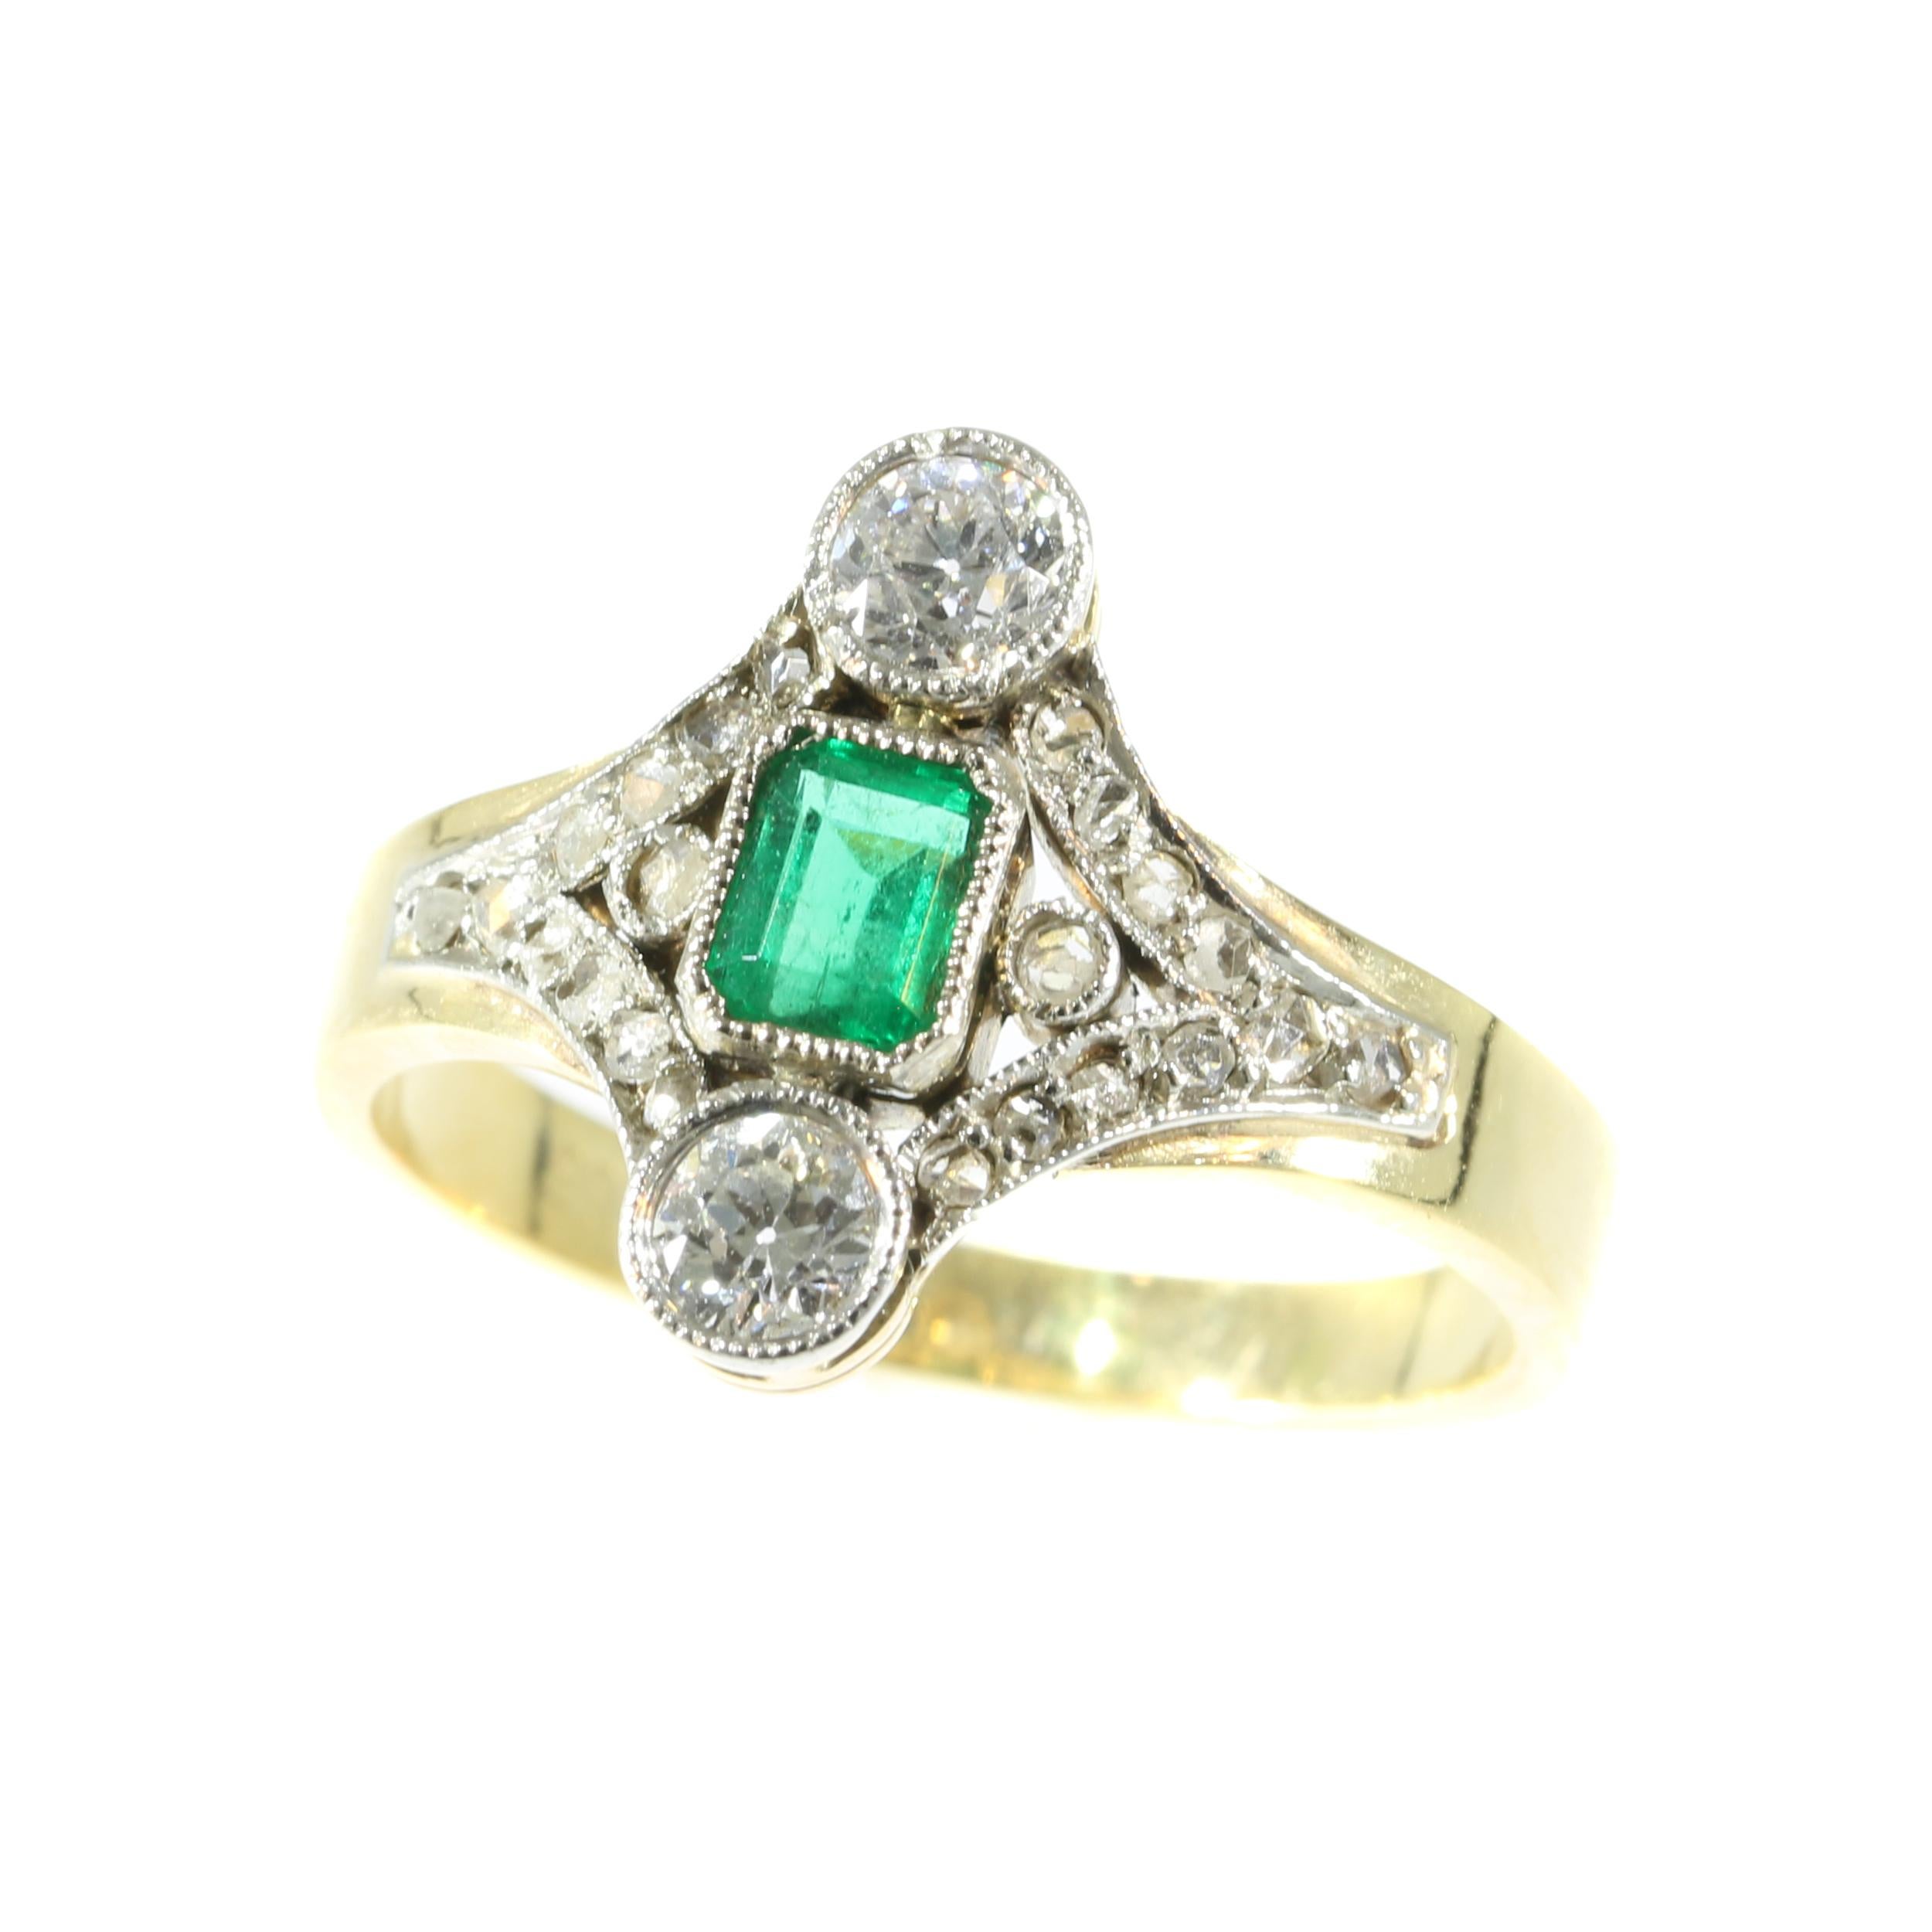 Late Victorian Antique Diamond Emerald Engagement Ring, 1900s        